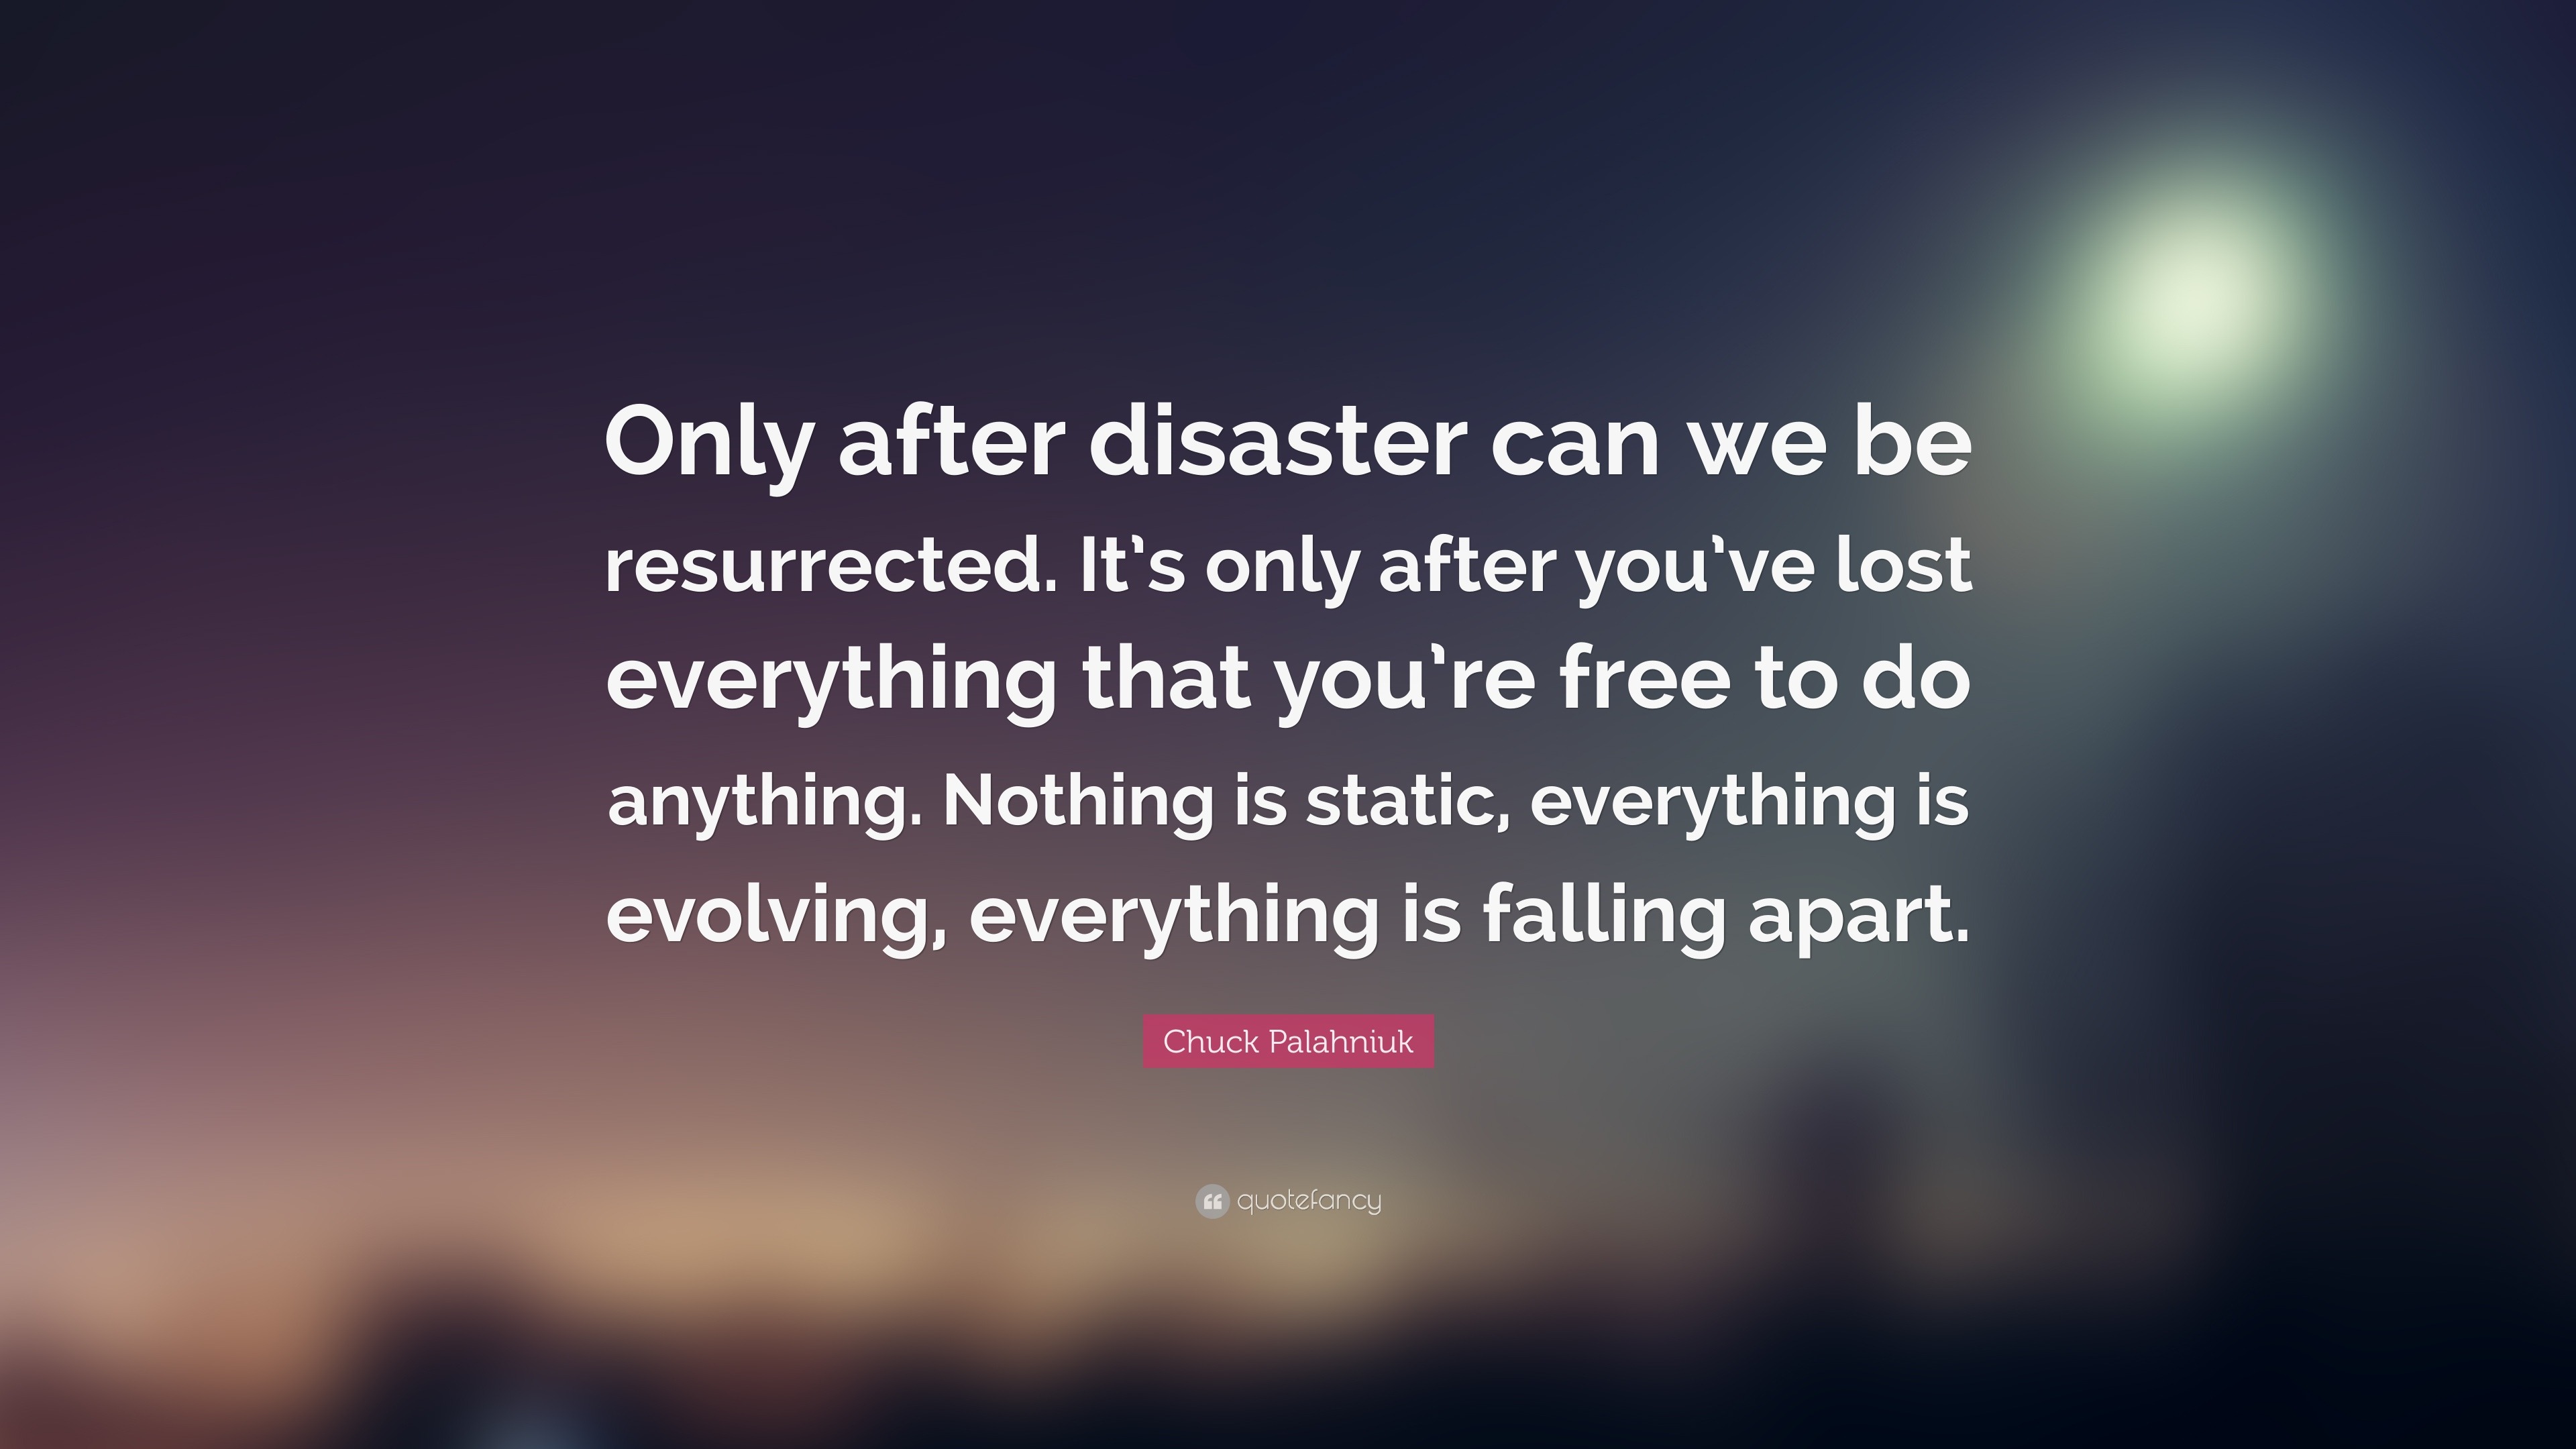 Chuck Palahniuk Quote: “Only after disaster can we be resurrected. It’s